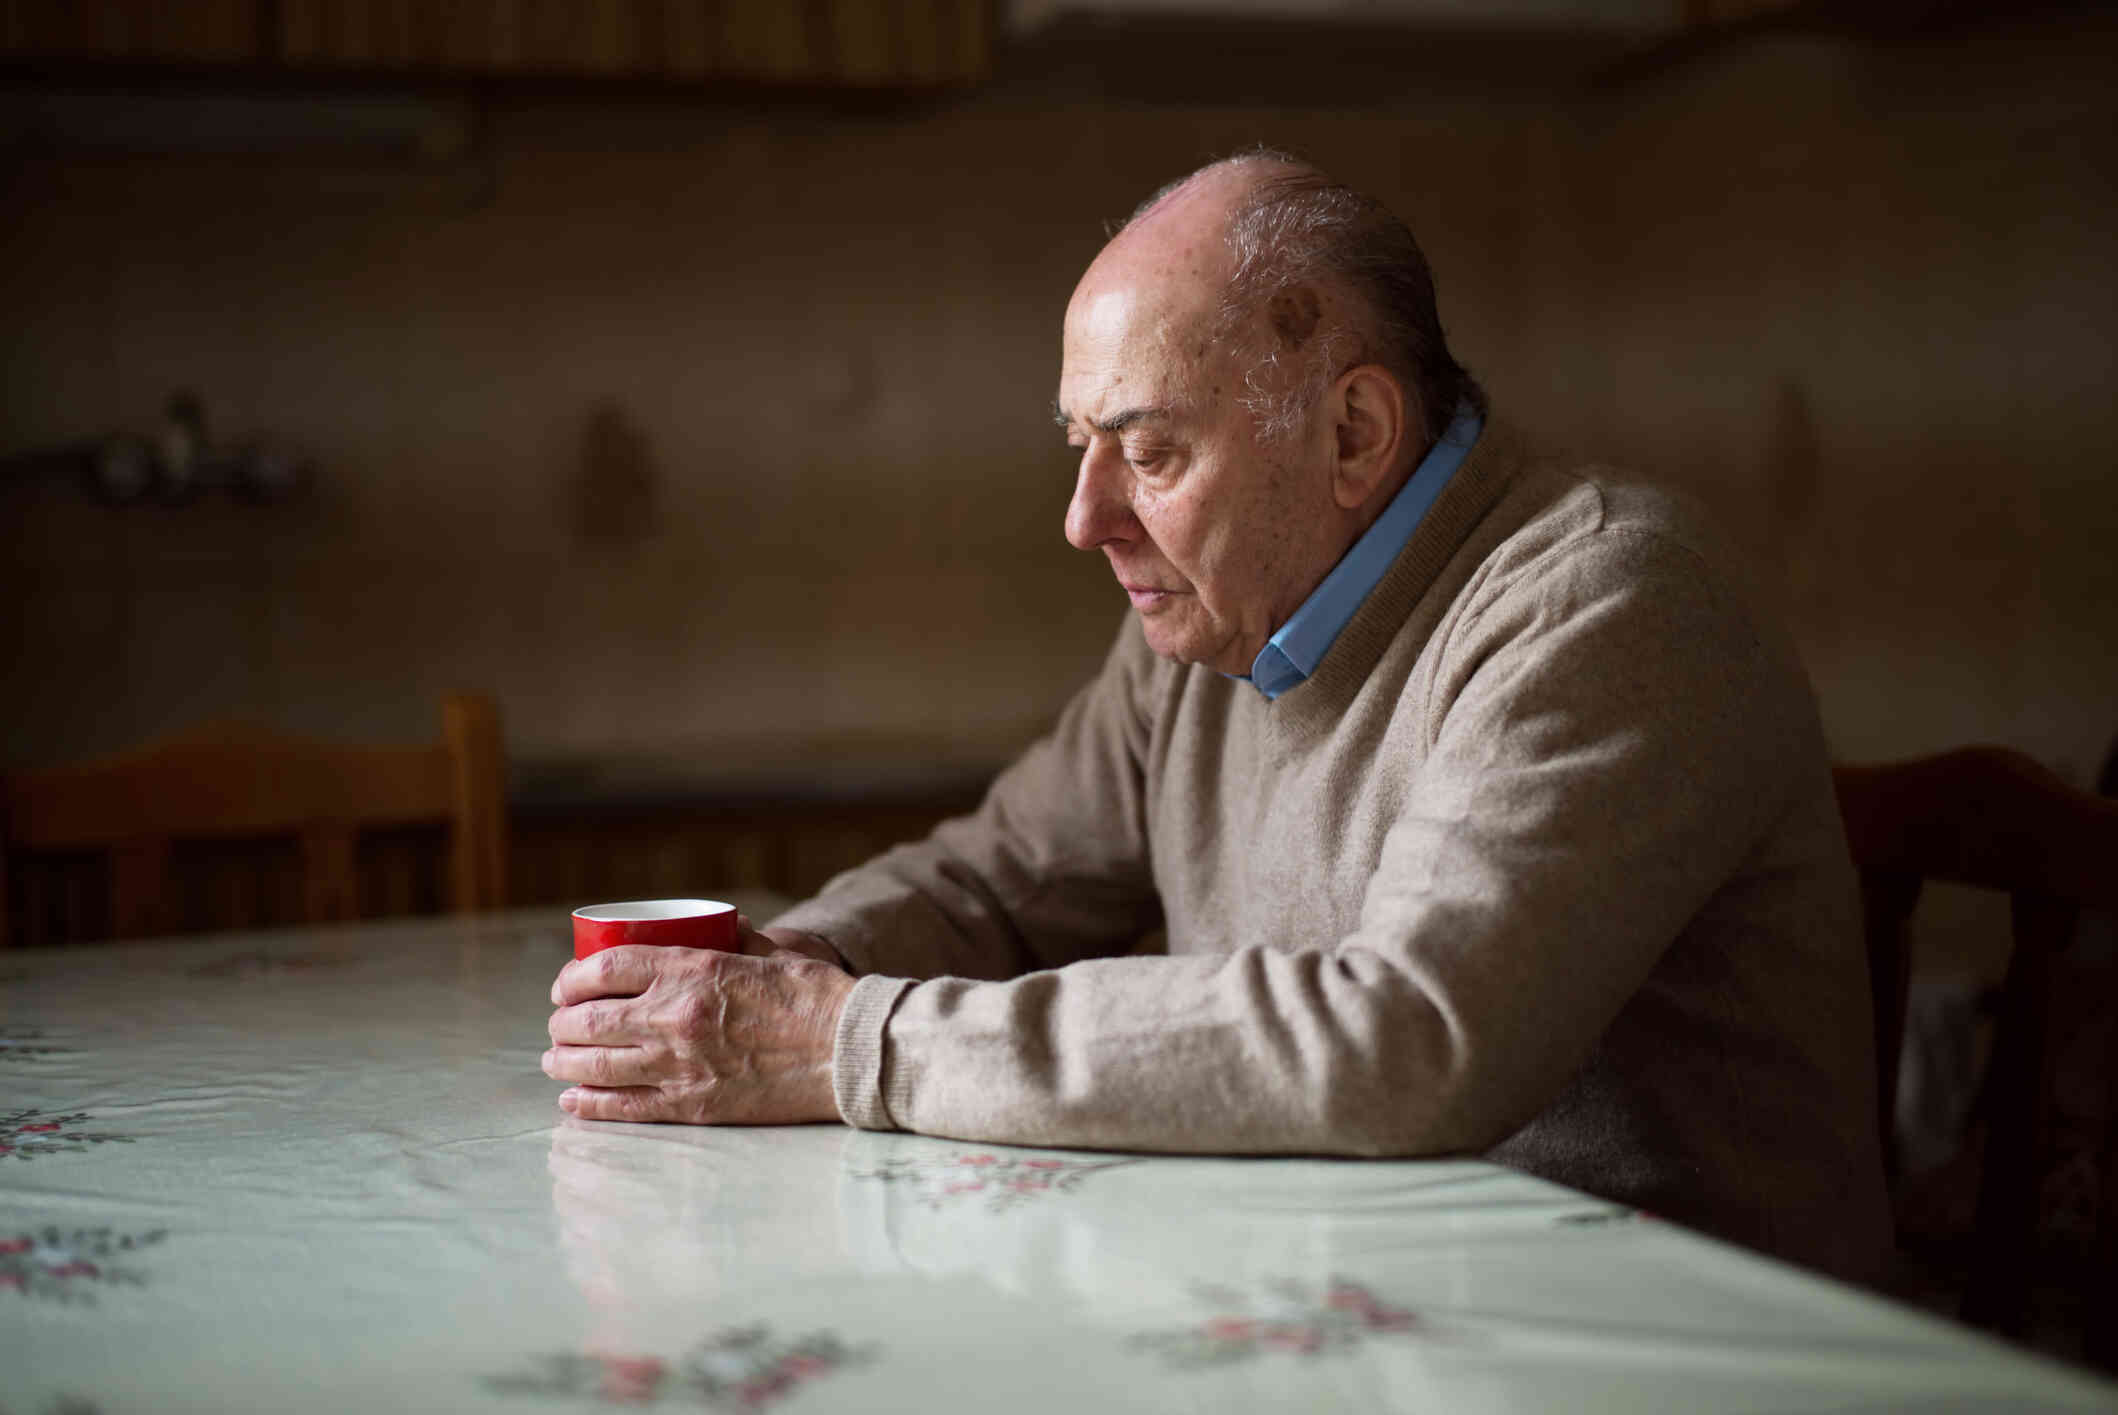 An elderly man sits alone at a counter in his home and sadly holds a red cup in his hands and gazes down.